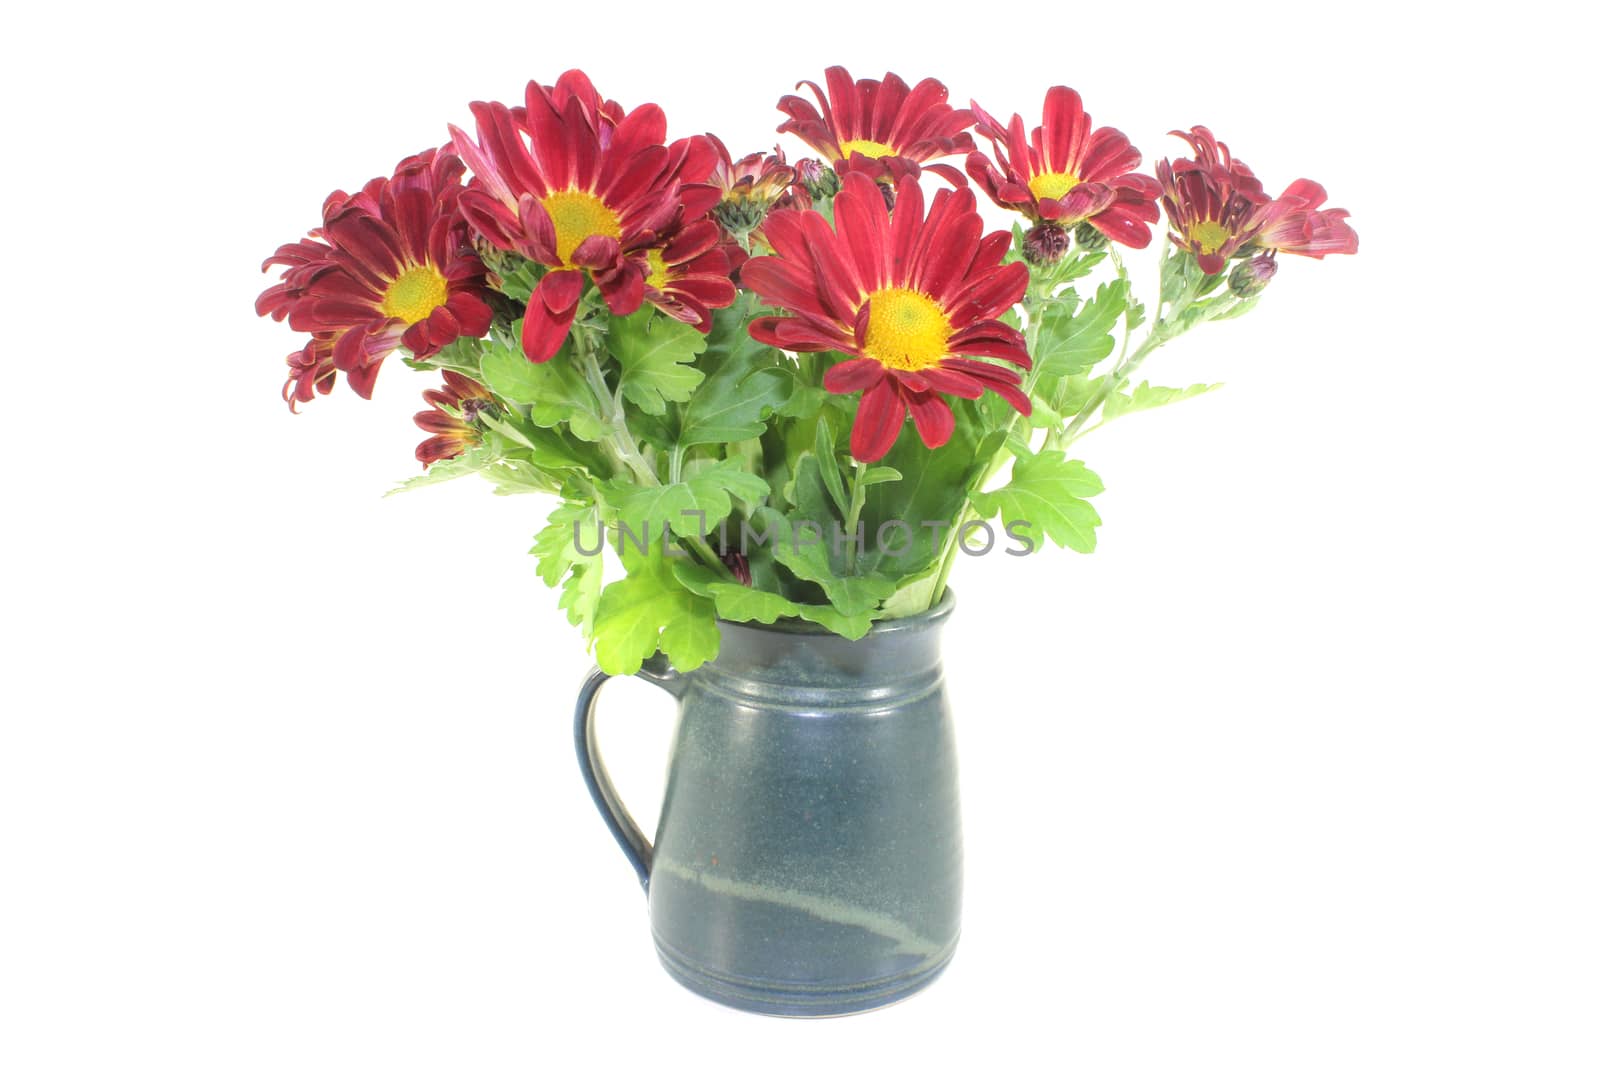 bouquet of chrysanthemums in a vase on light background